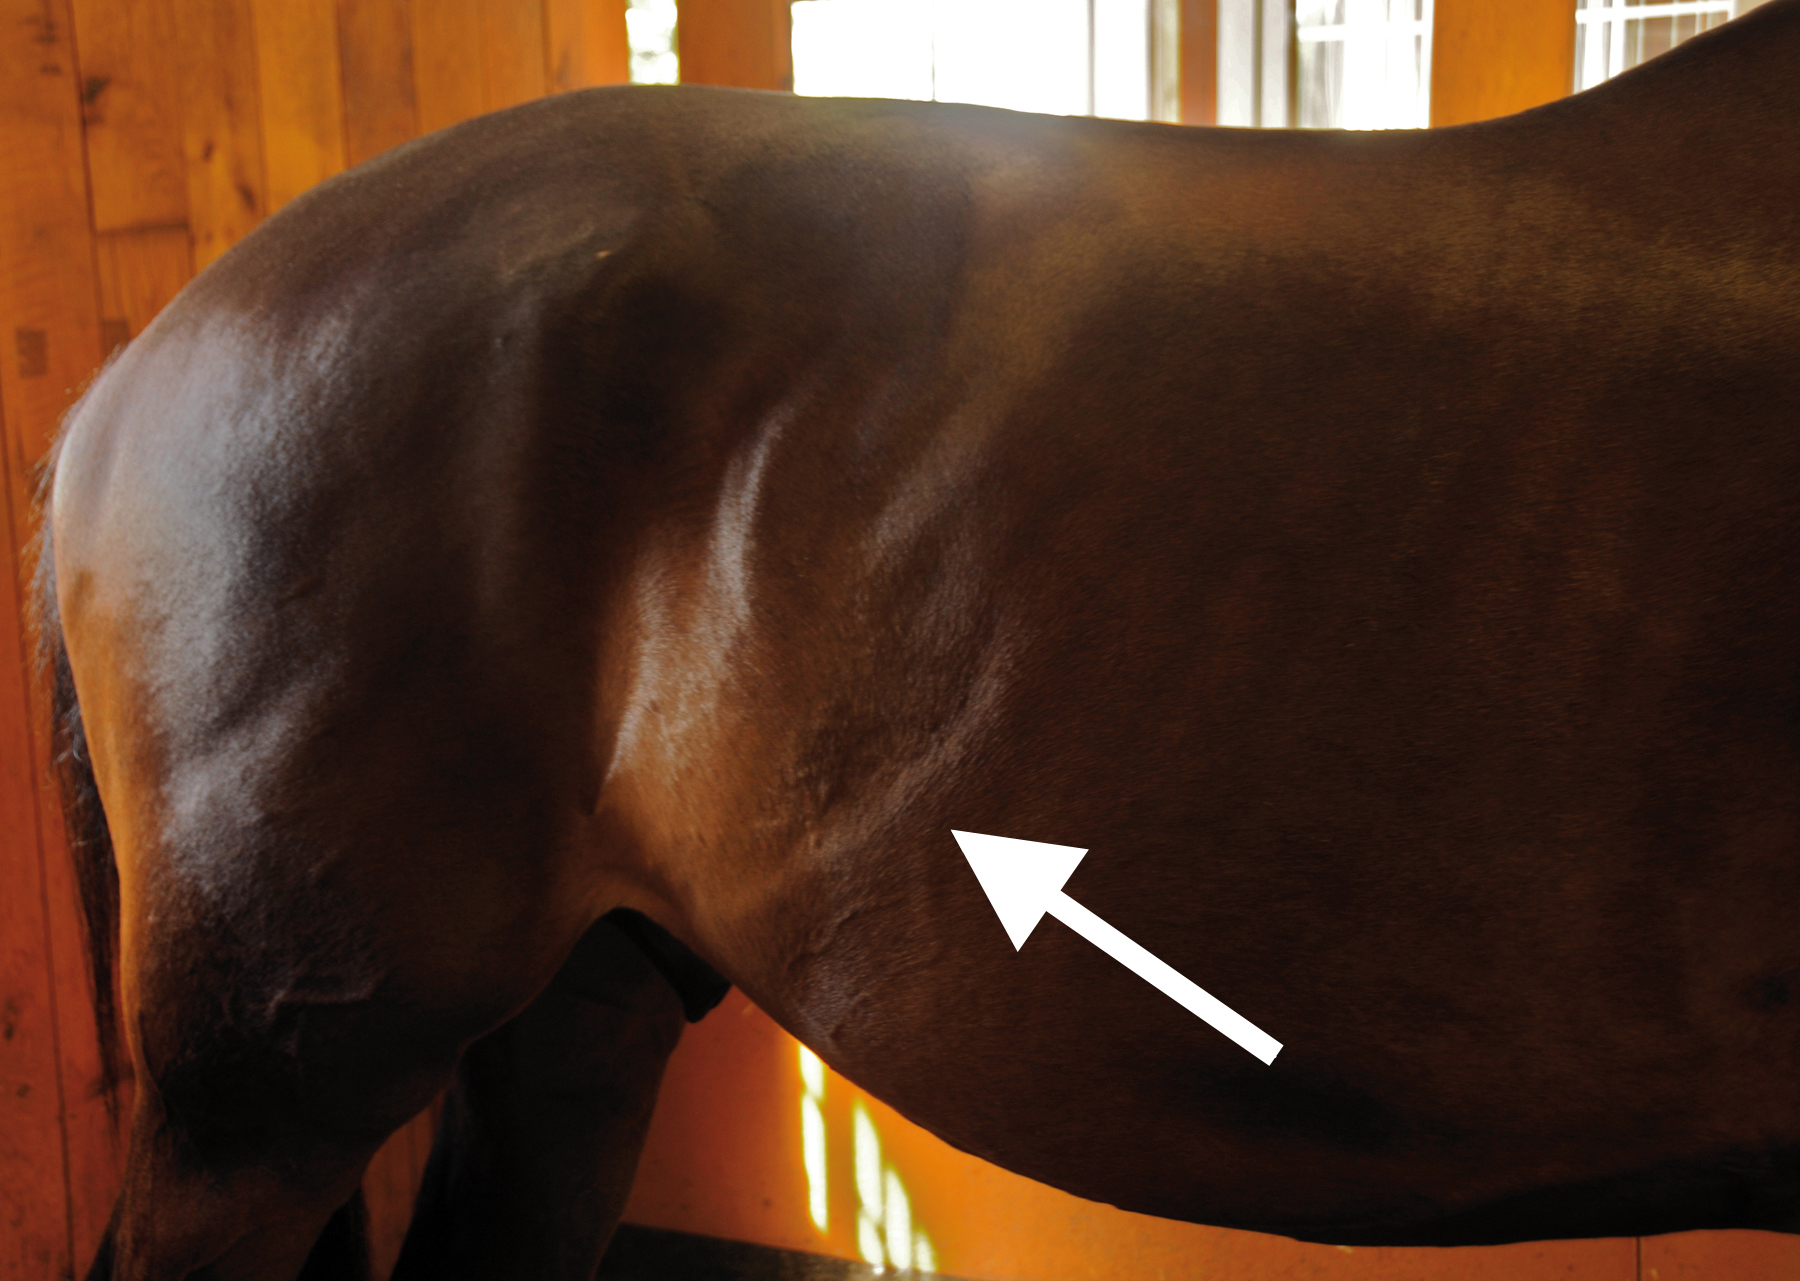 Constant muscular contraction results in incorrect definition at the flank - caused either by a saddle sitting on the withers or from one that presses down on the spinal column.